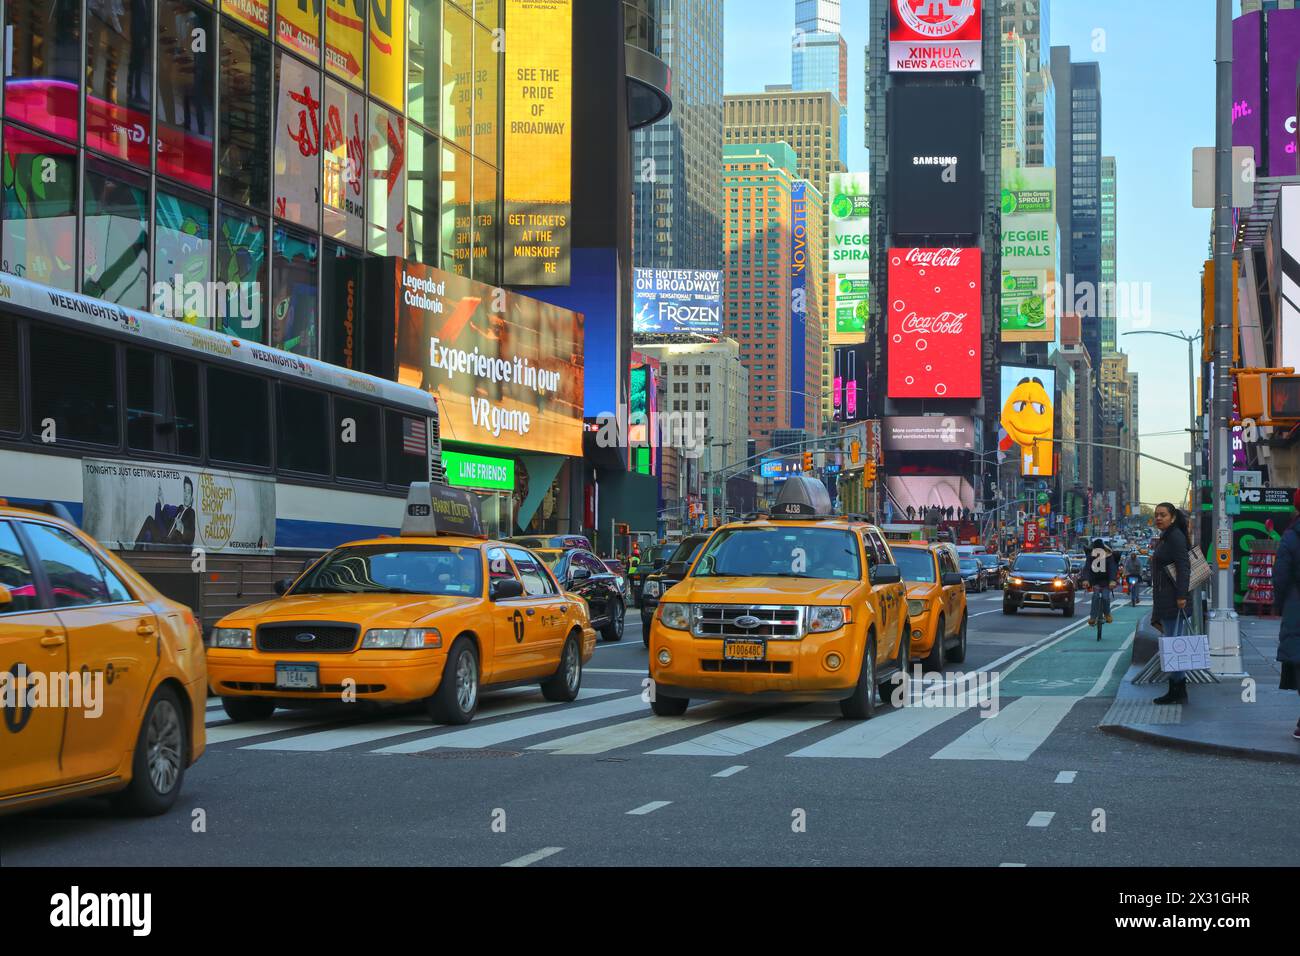 Geografie / Reise, USA, New York, New York City, Times Square at Night, Midtown, ADDITIONAL-RIGHTS-CLEARANCE-INFO-NOT-AVAILABLE Stockfoto